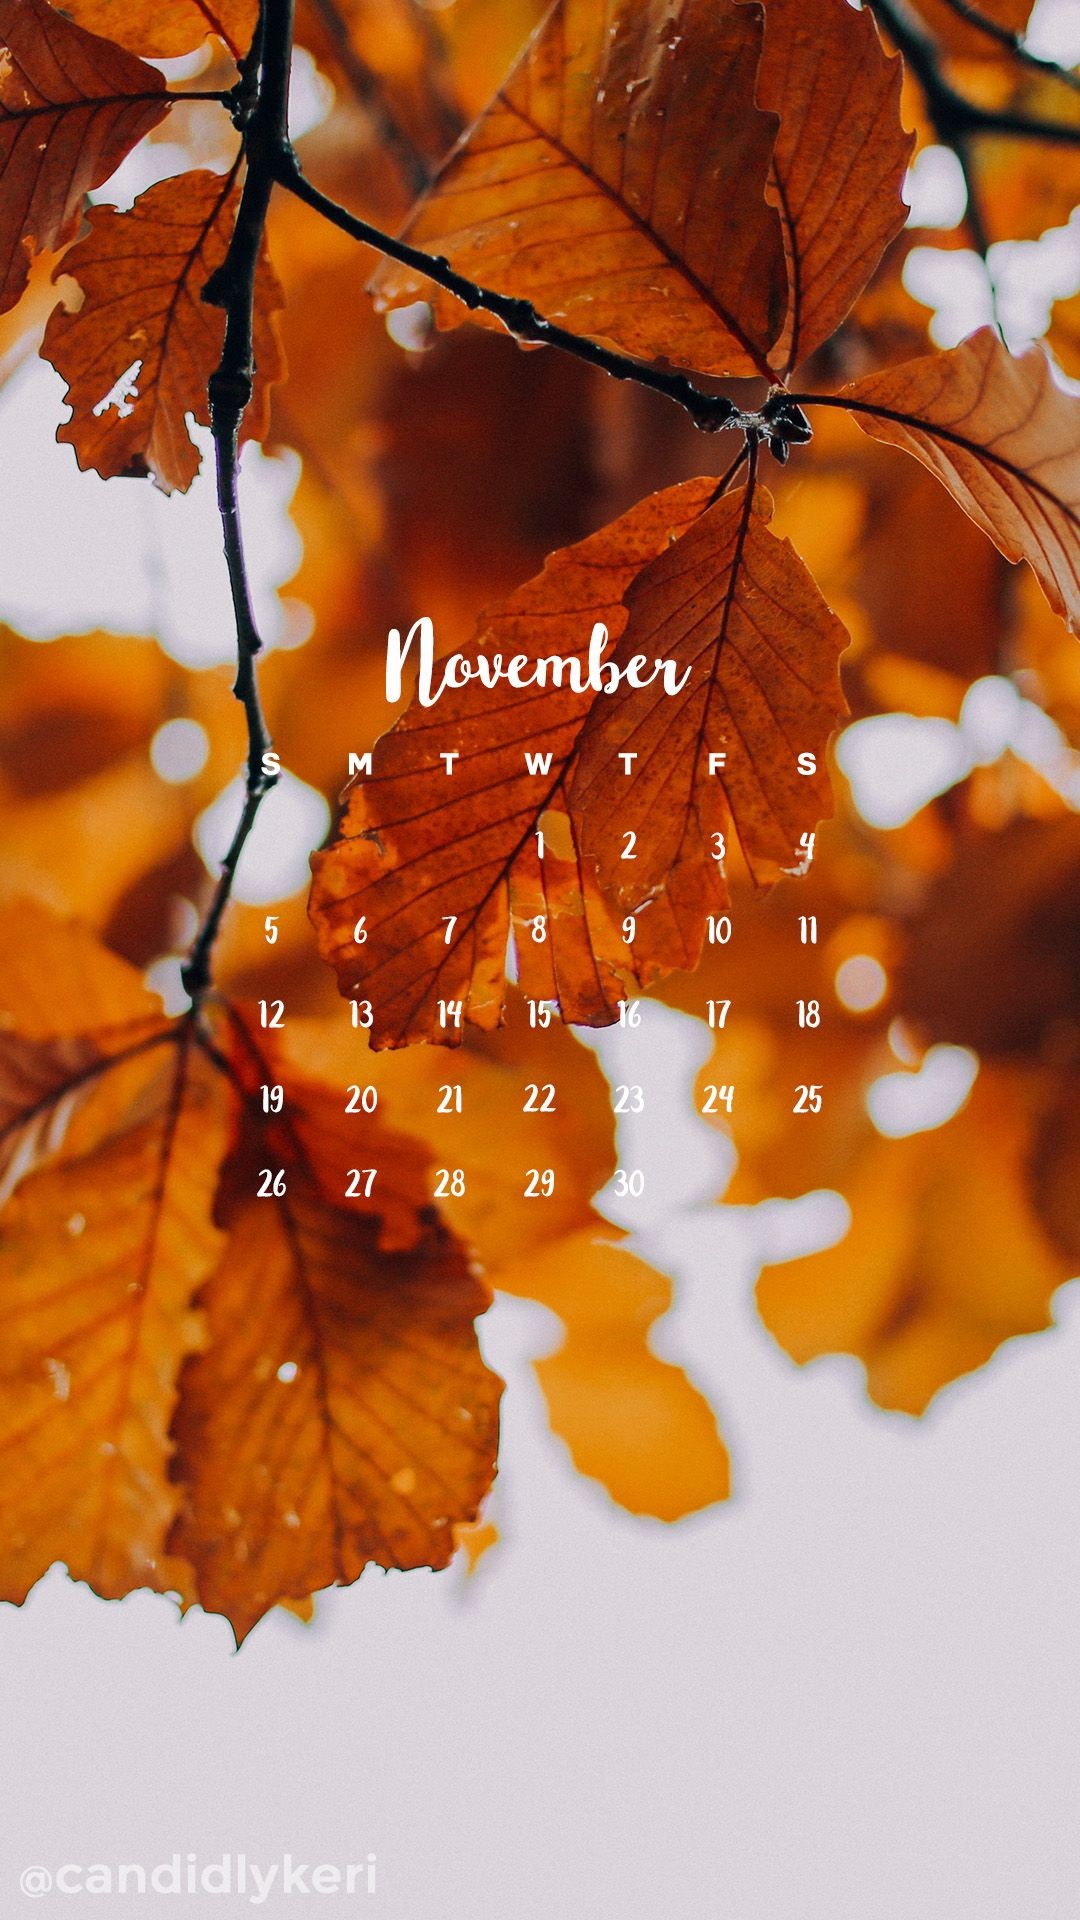 1080x1920 Golden changing fall leaves November calendar 2017 wallpaper you can  download on the blog! For any device; mobile, desktop, iphone, android!